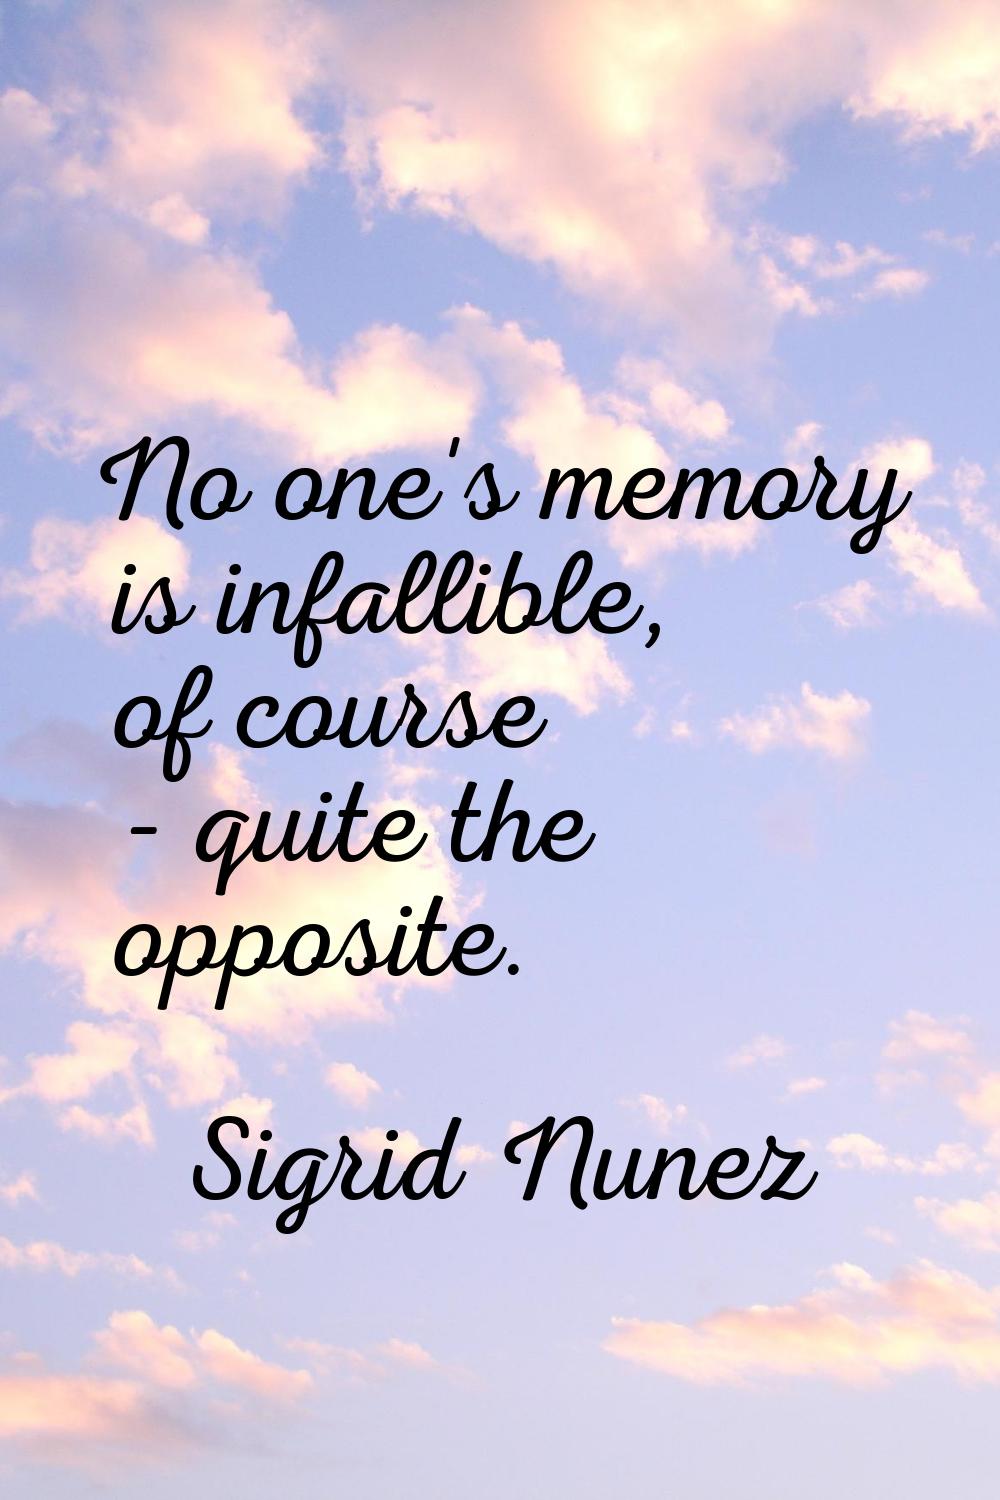 No one's memory is infallible, of course - quite the opposite.